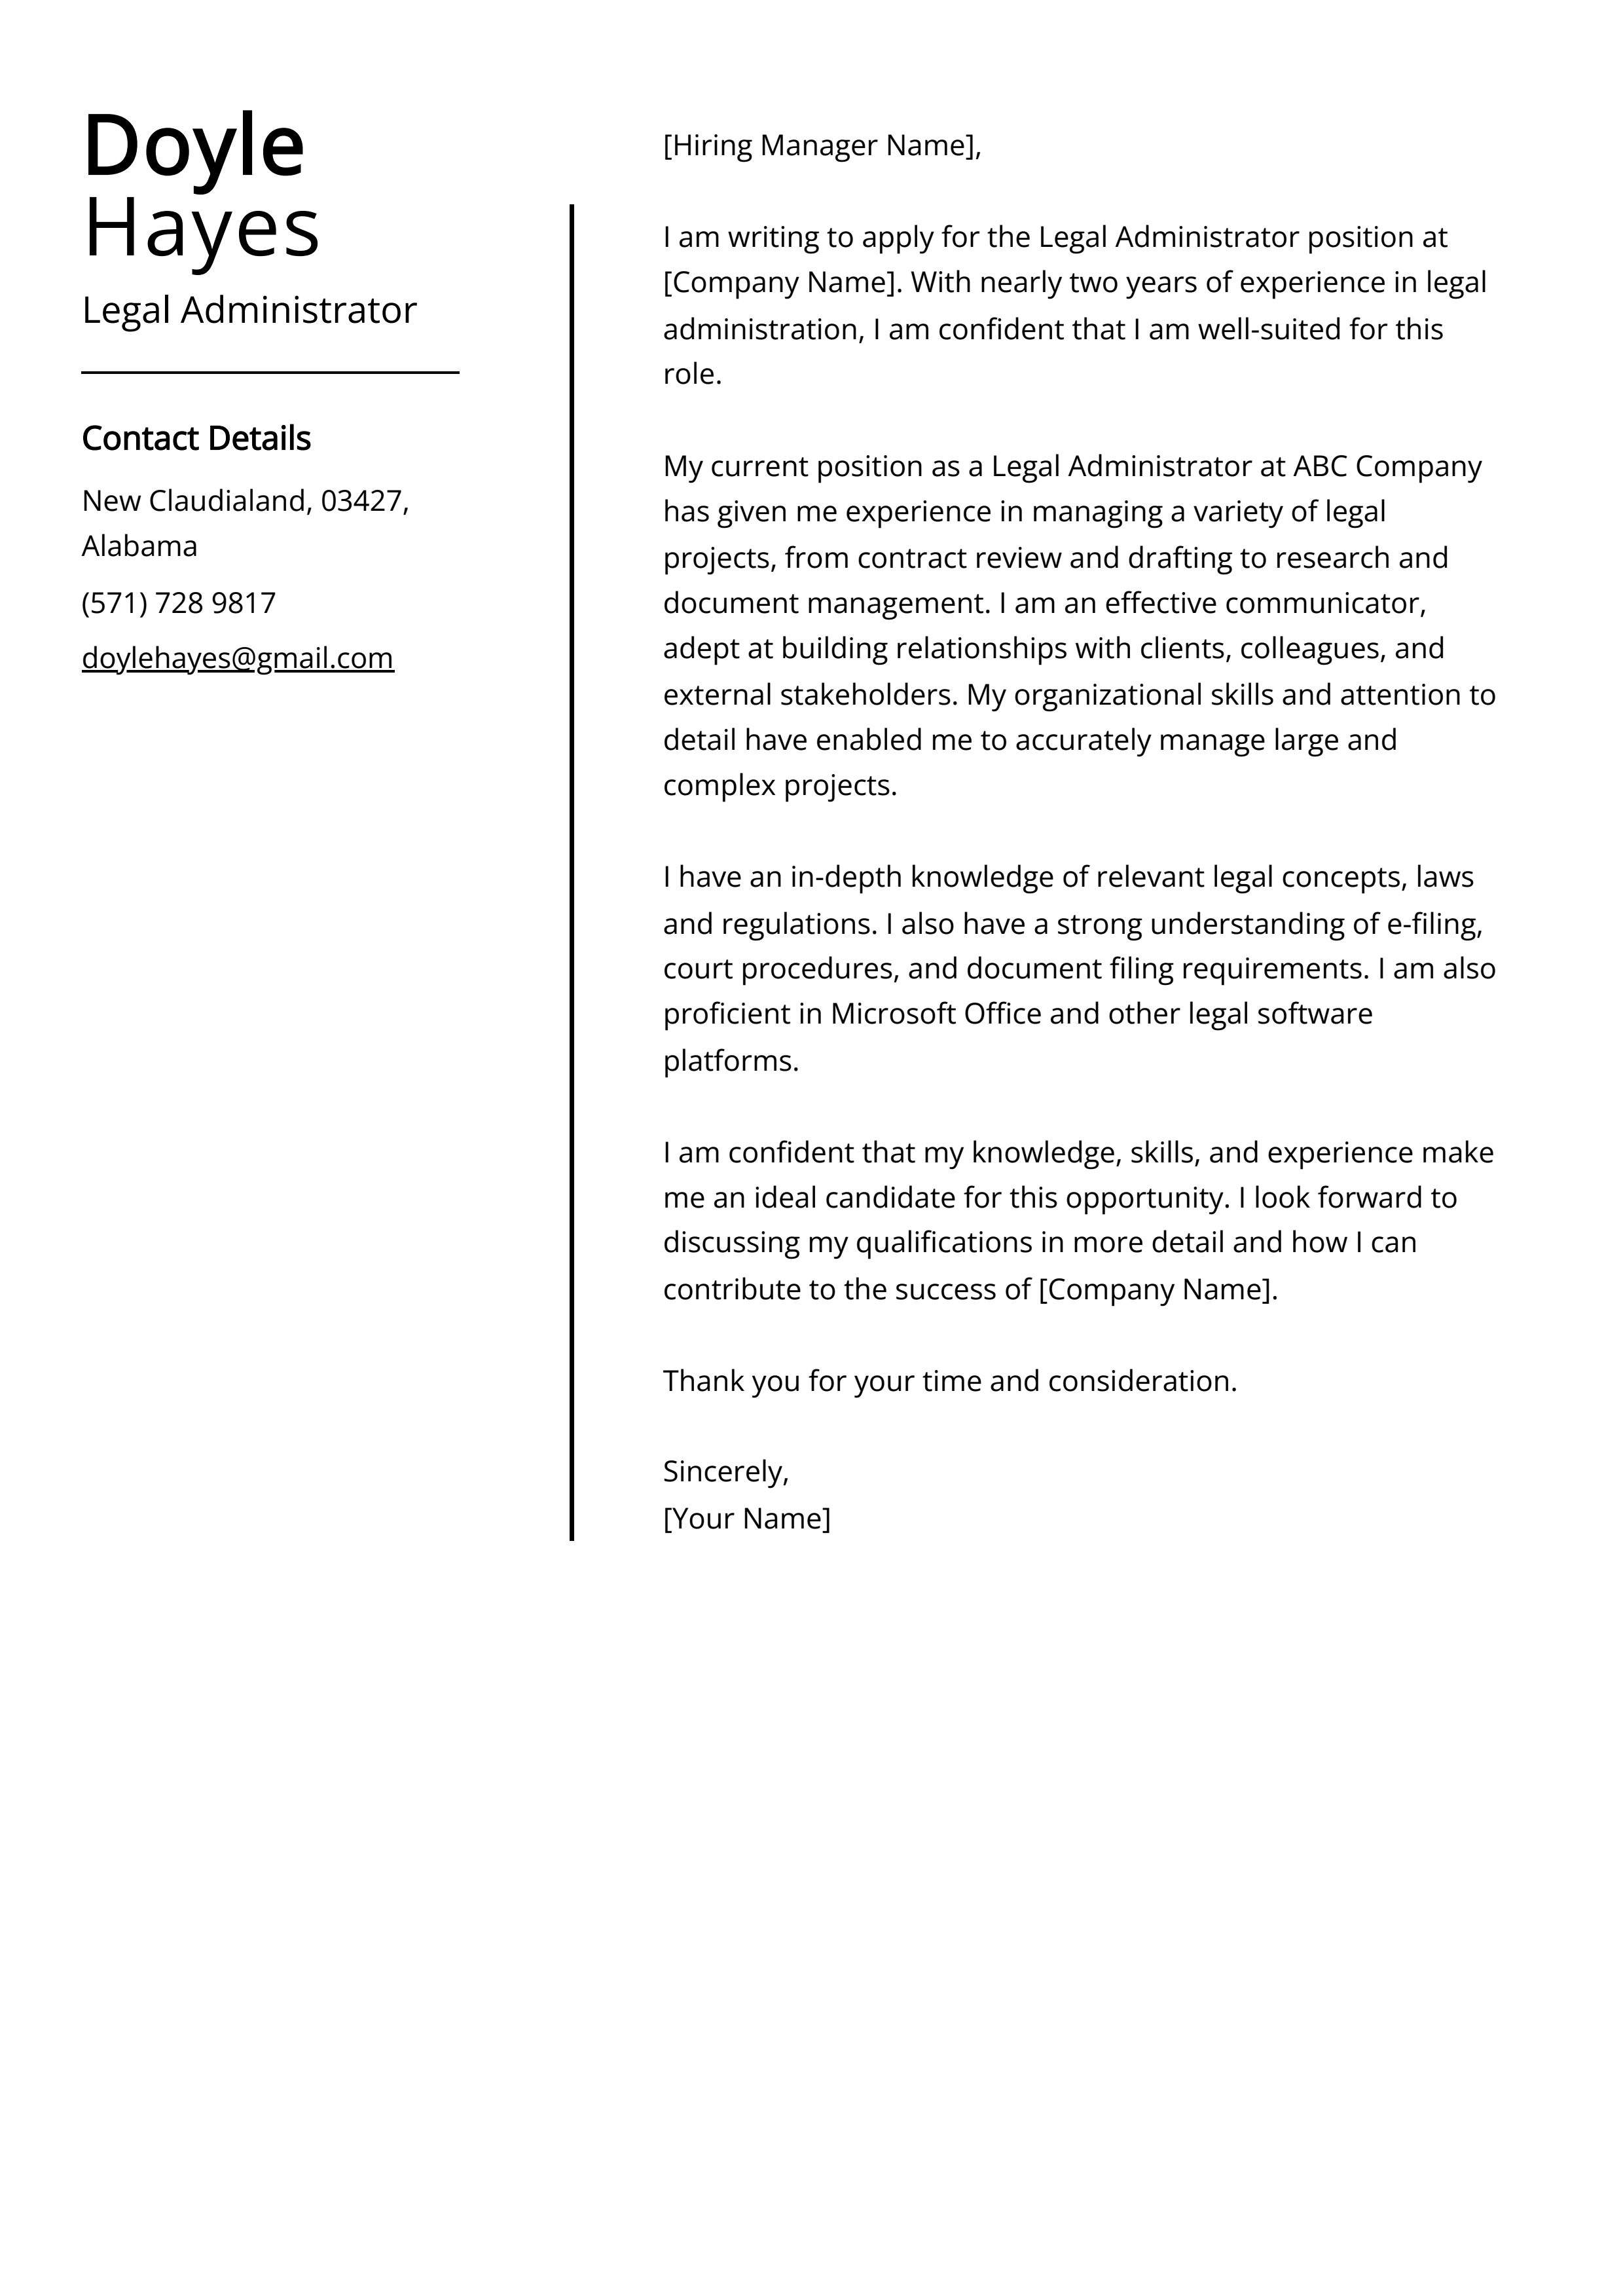 Legal Administrator Cover Letter Example